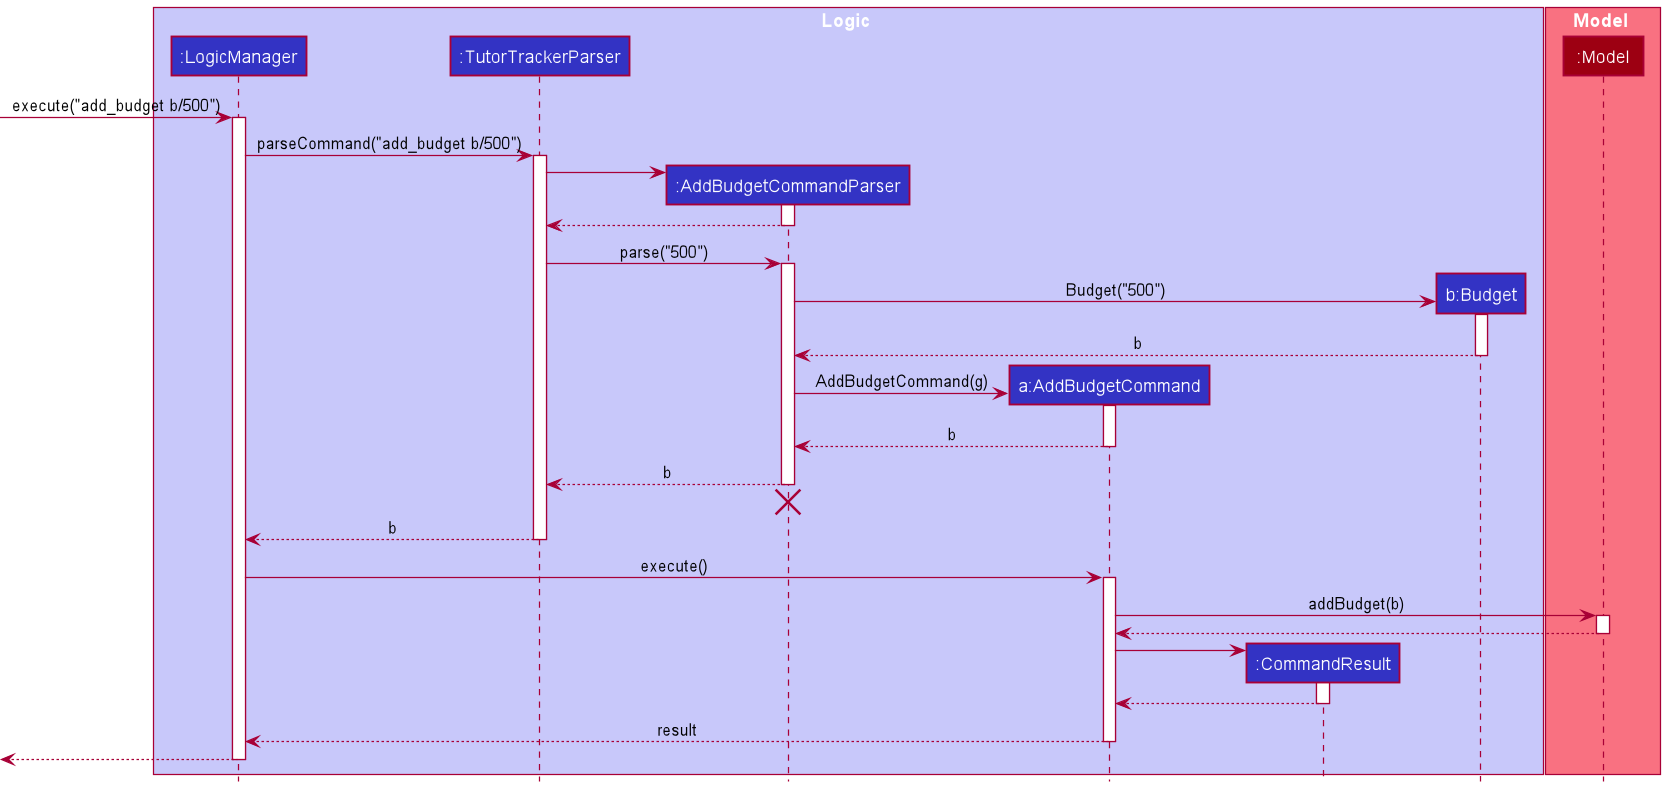 Sequence Diagram for Add Budget